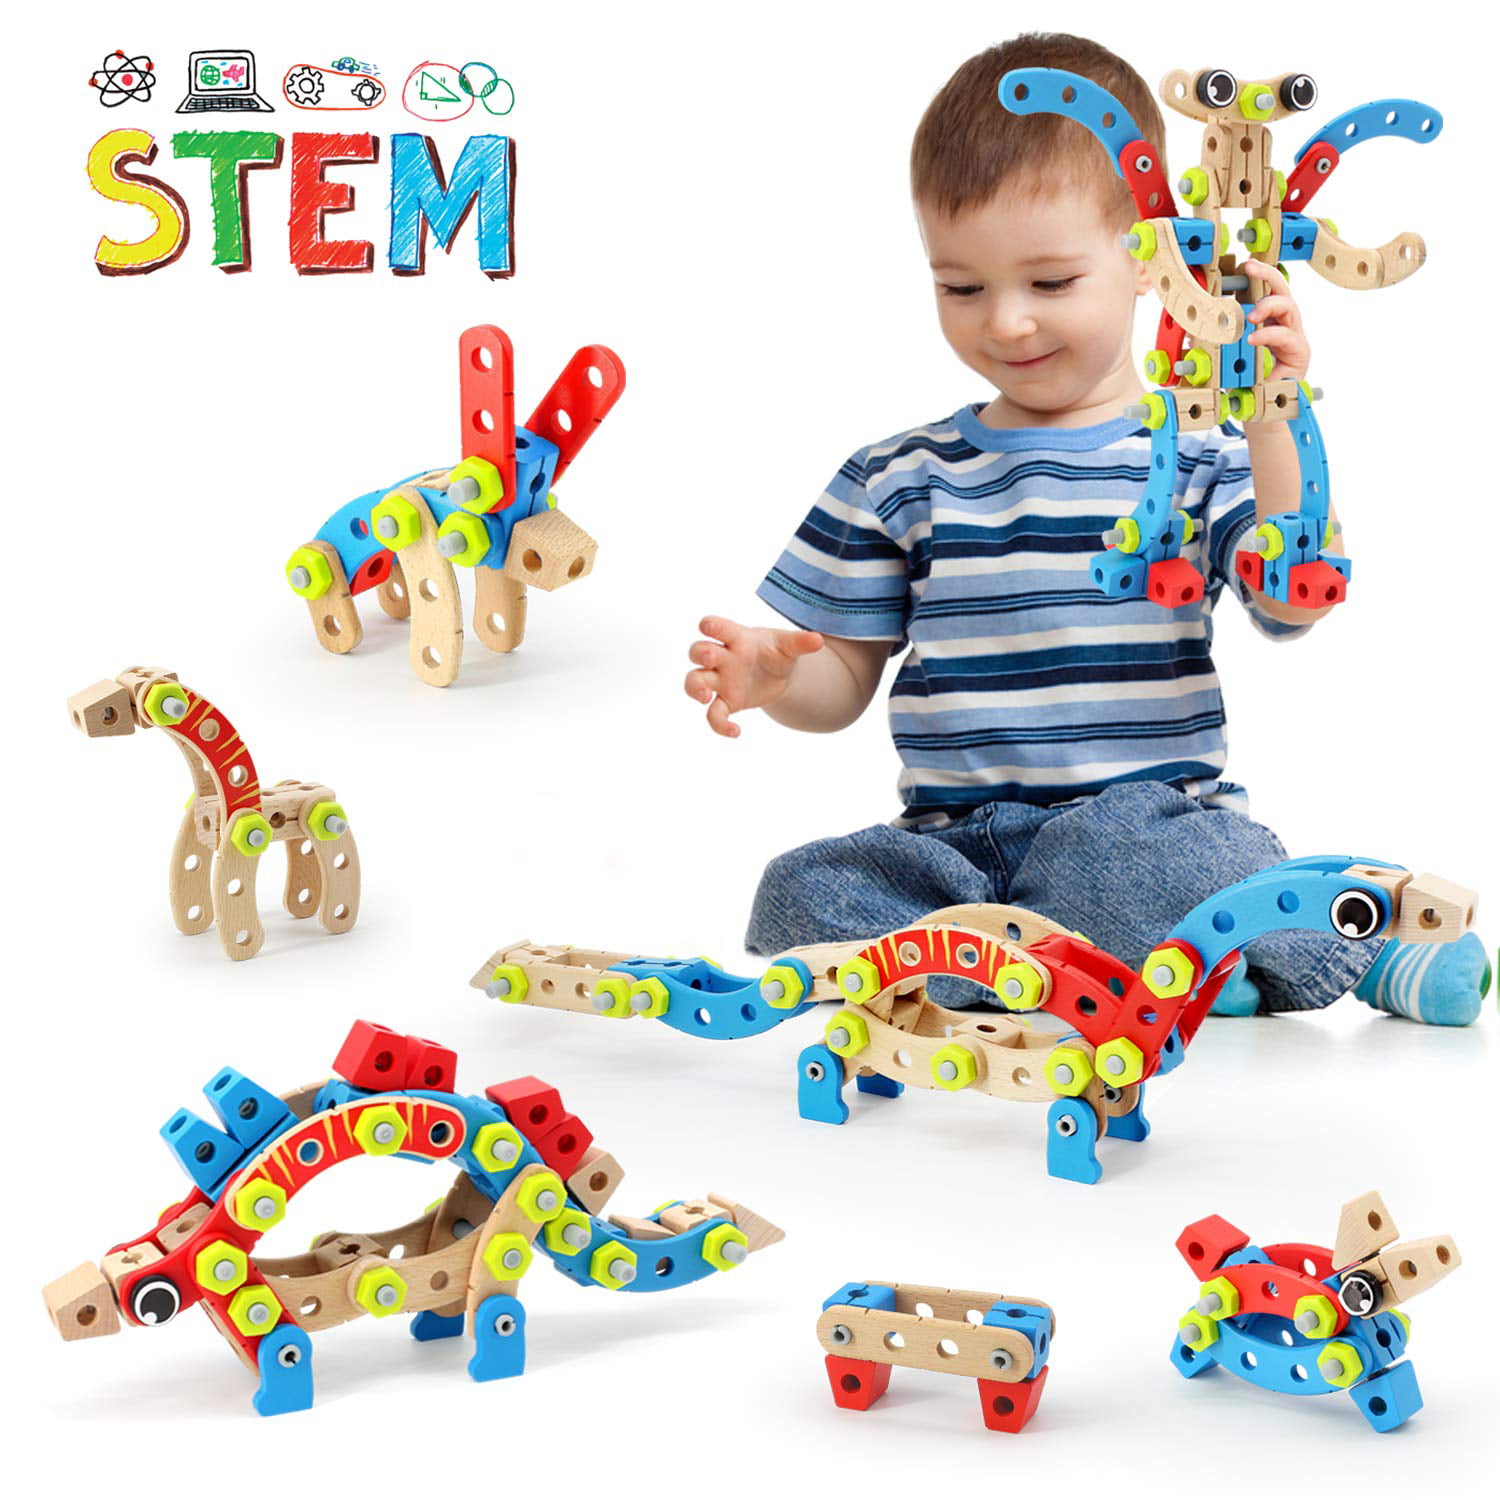 STEM Toy for 3 4 5 6 7 Year Olds Boy, 96 PCS Wooden Building Toys for 